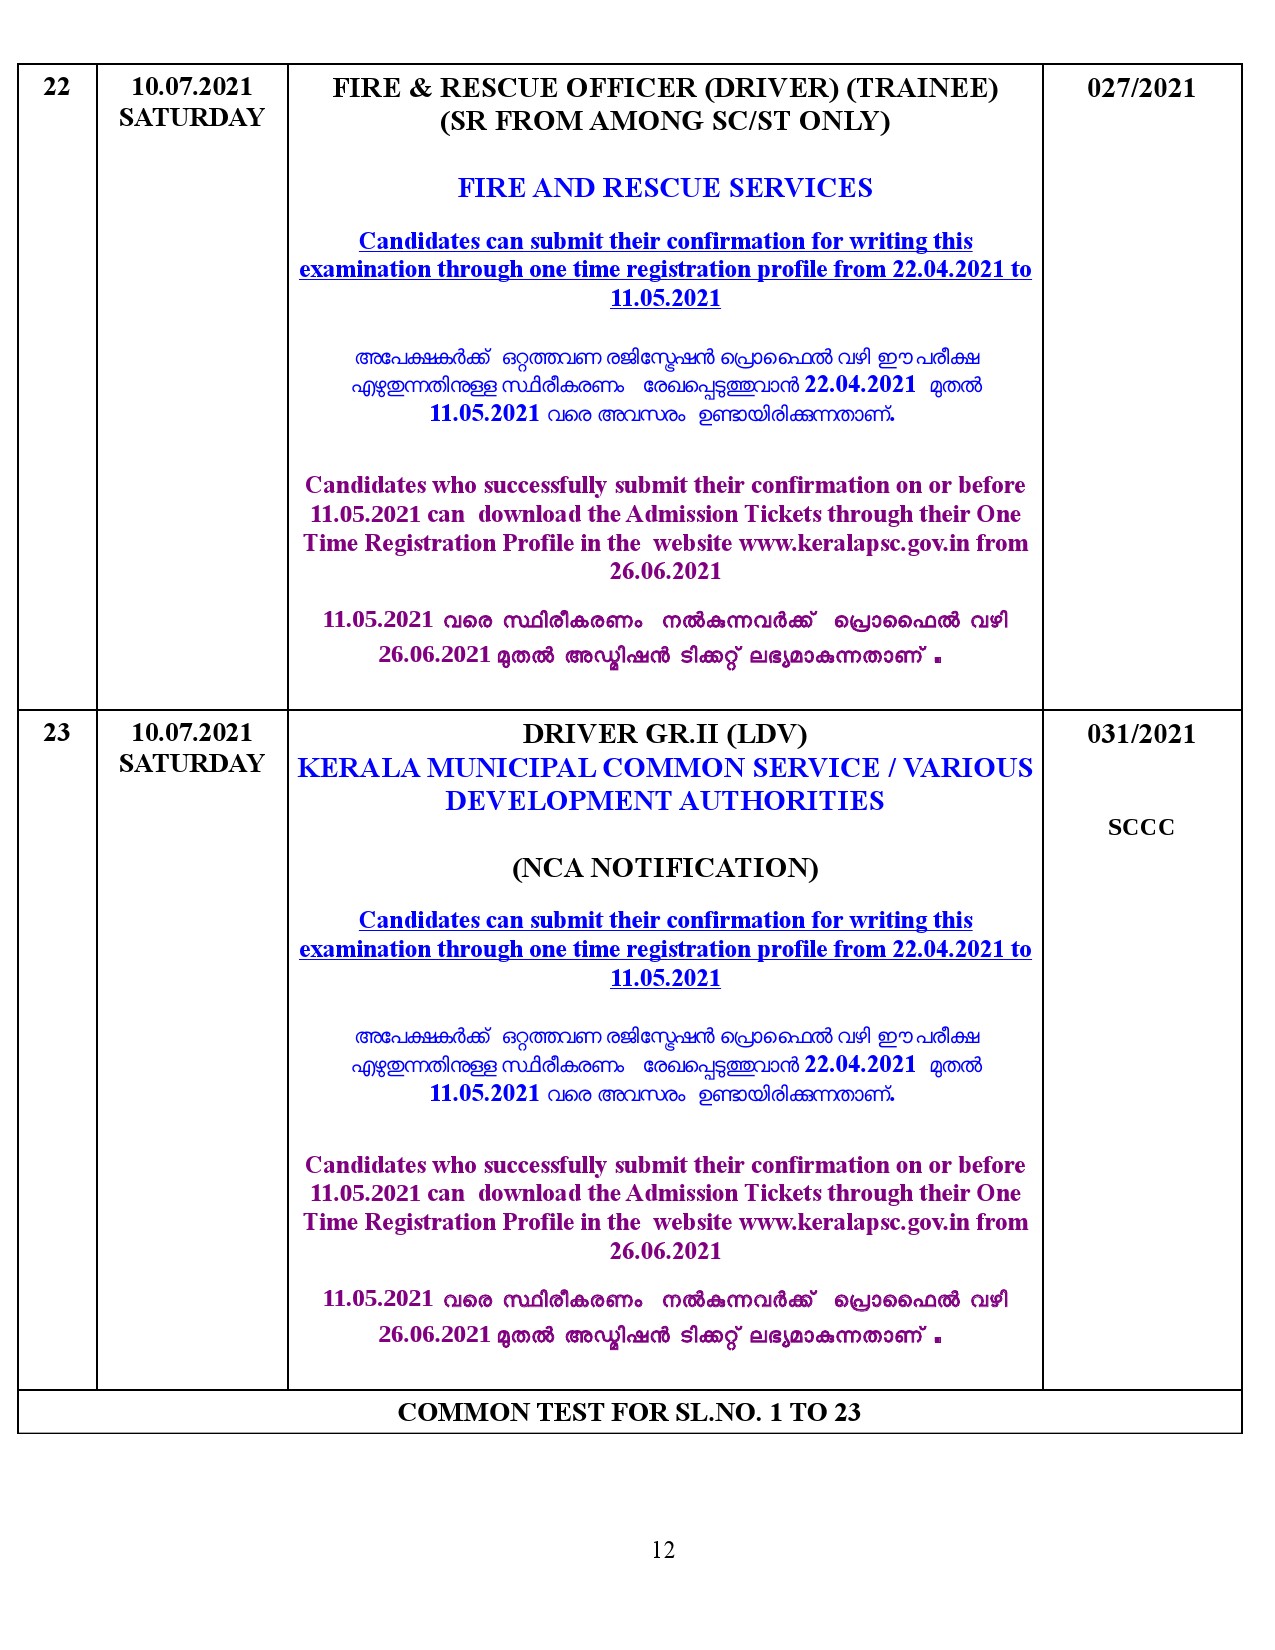 KPSC Examination Programme For The Month Of July 2021 - Notification Image 12